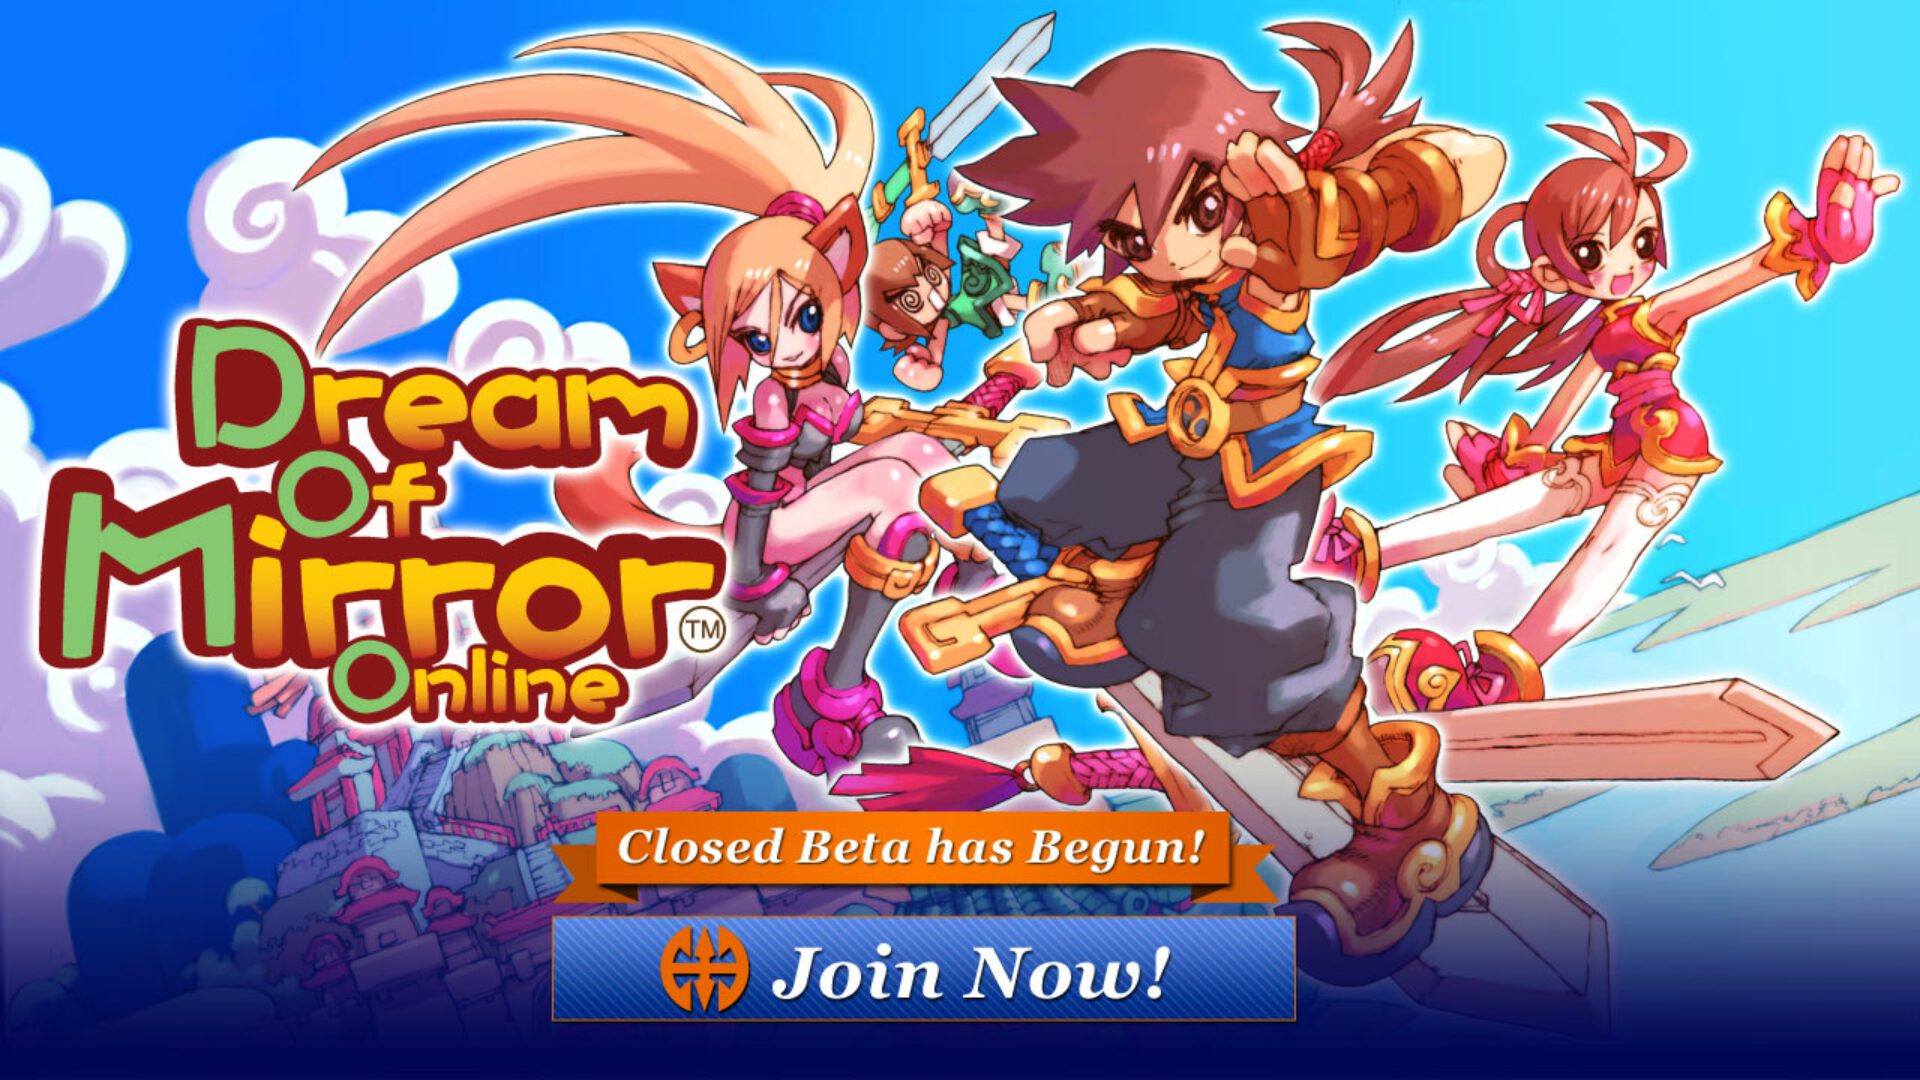 Dream of Mirror Online Closed Beta Giveaway